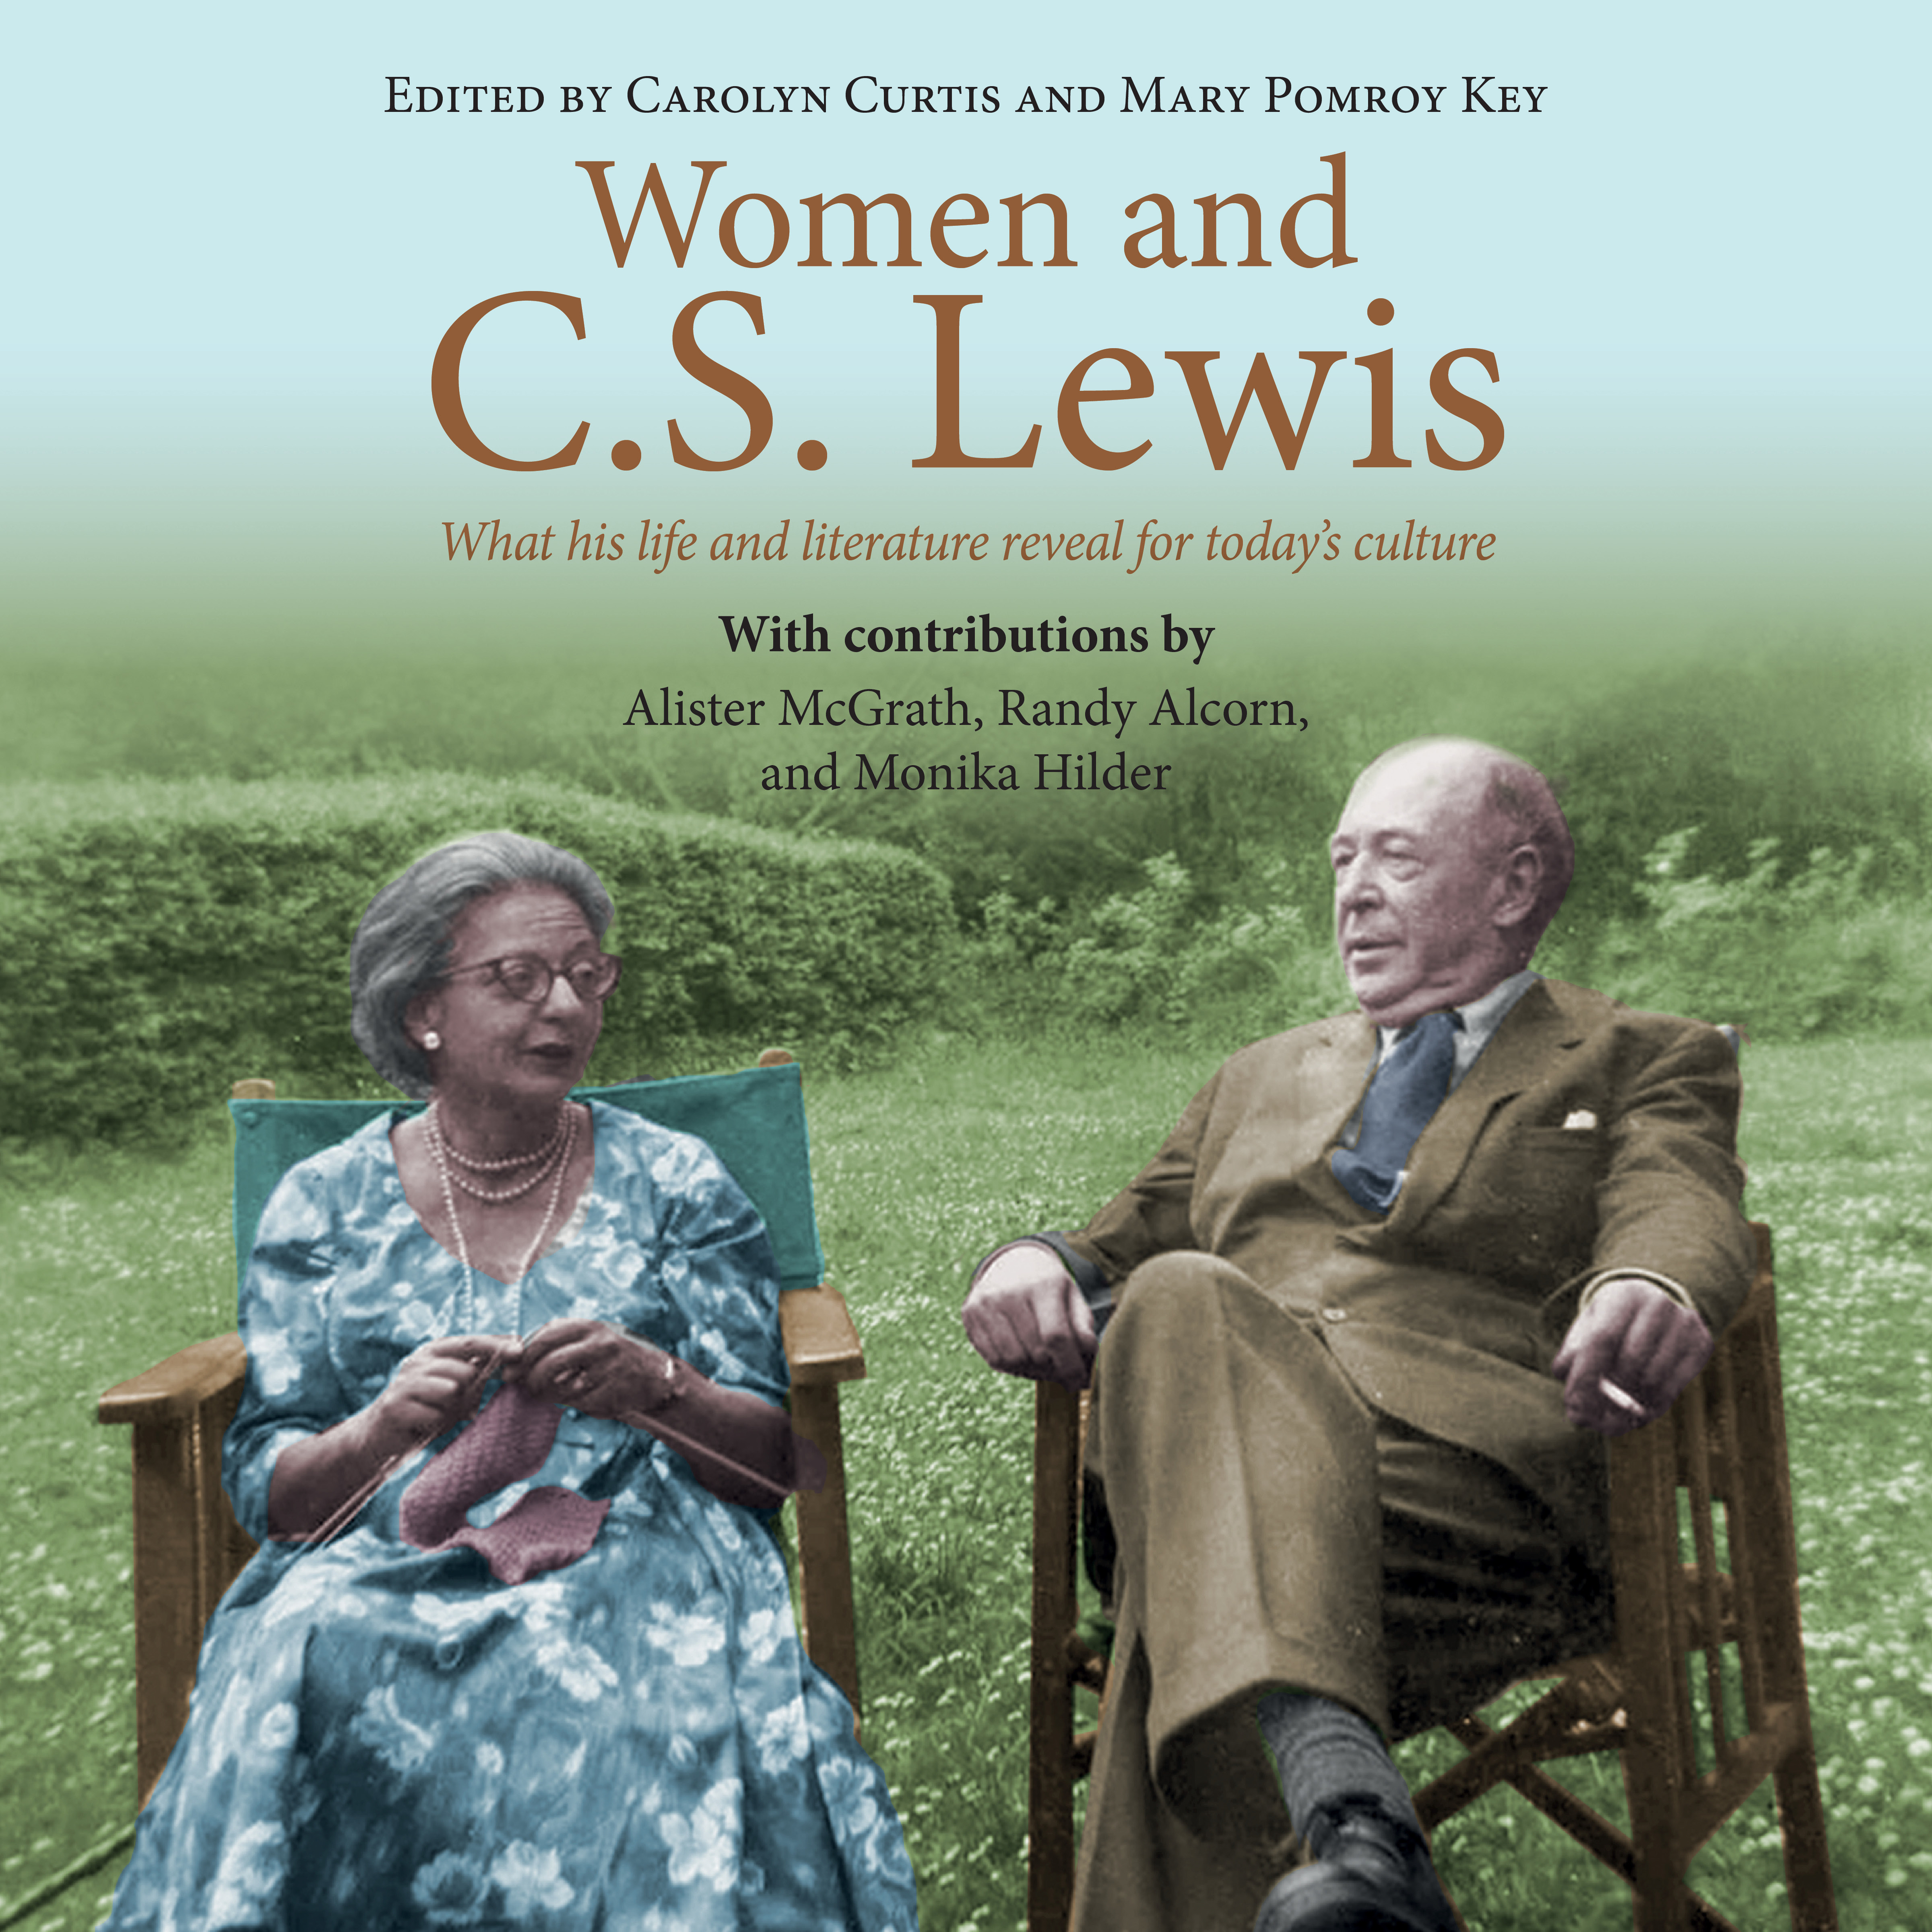 Women and C.S. Lewis